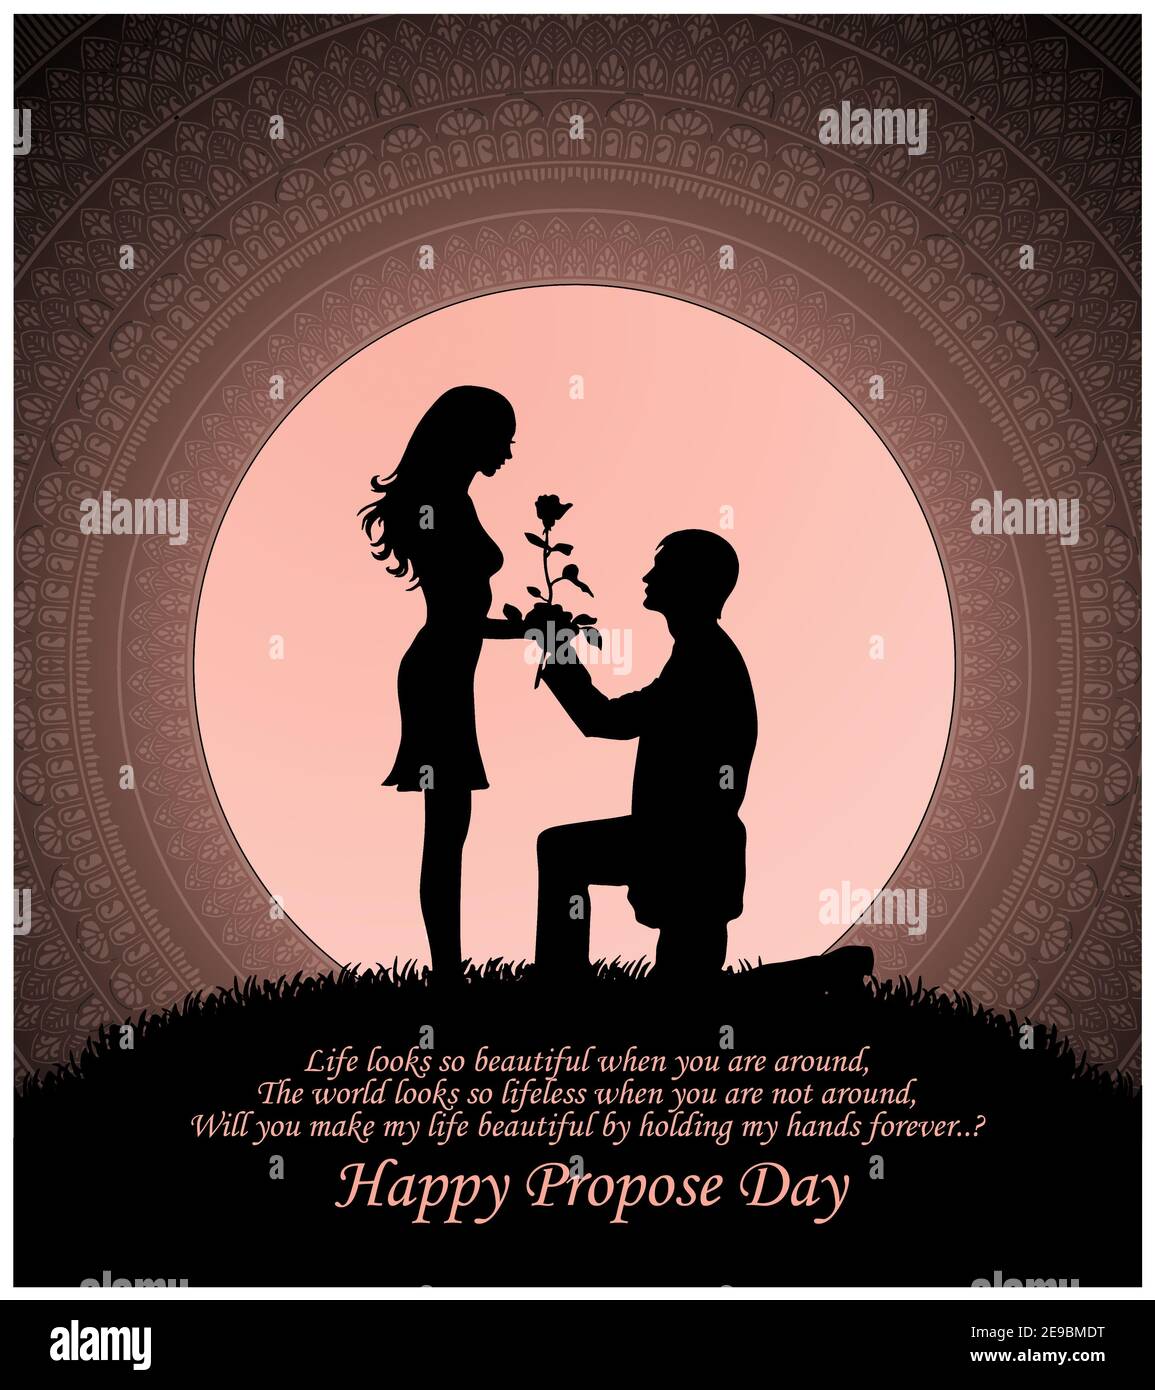 propose day illustration with quote .Man proposing her girl with ...